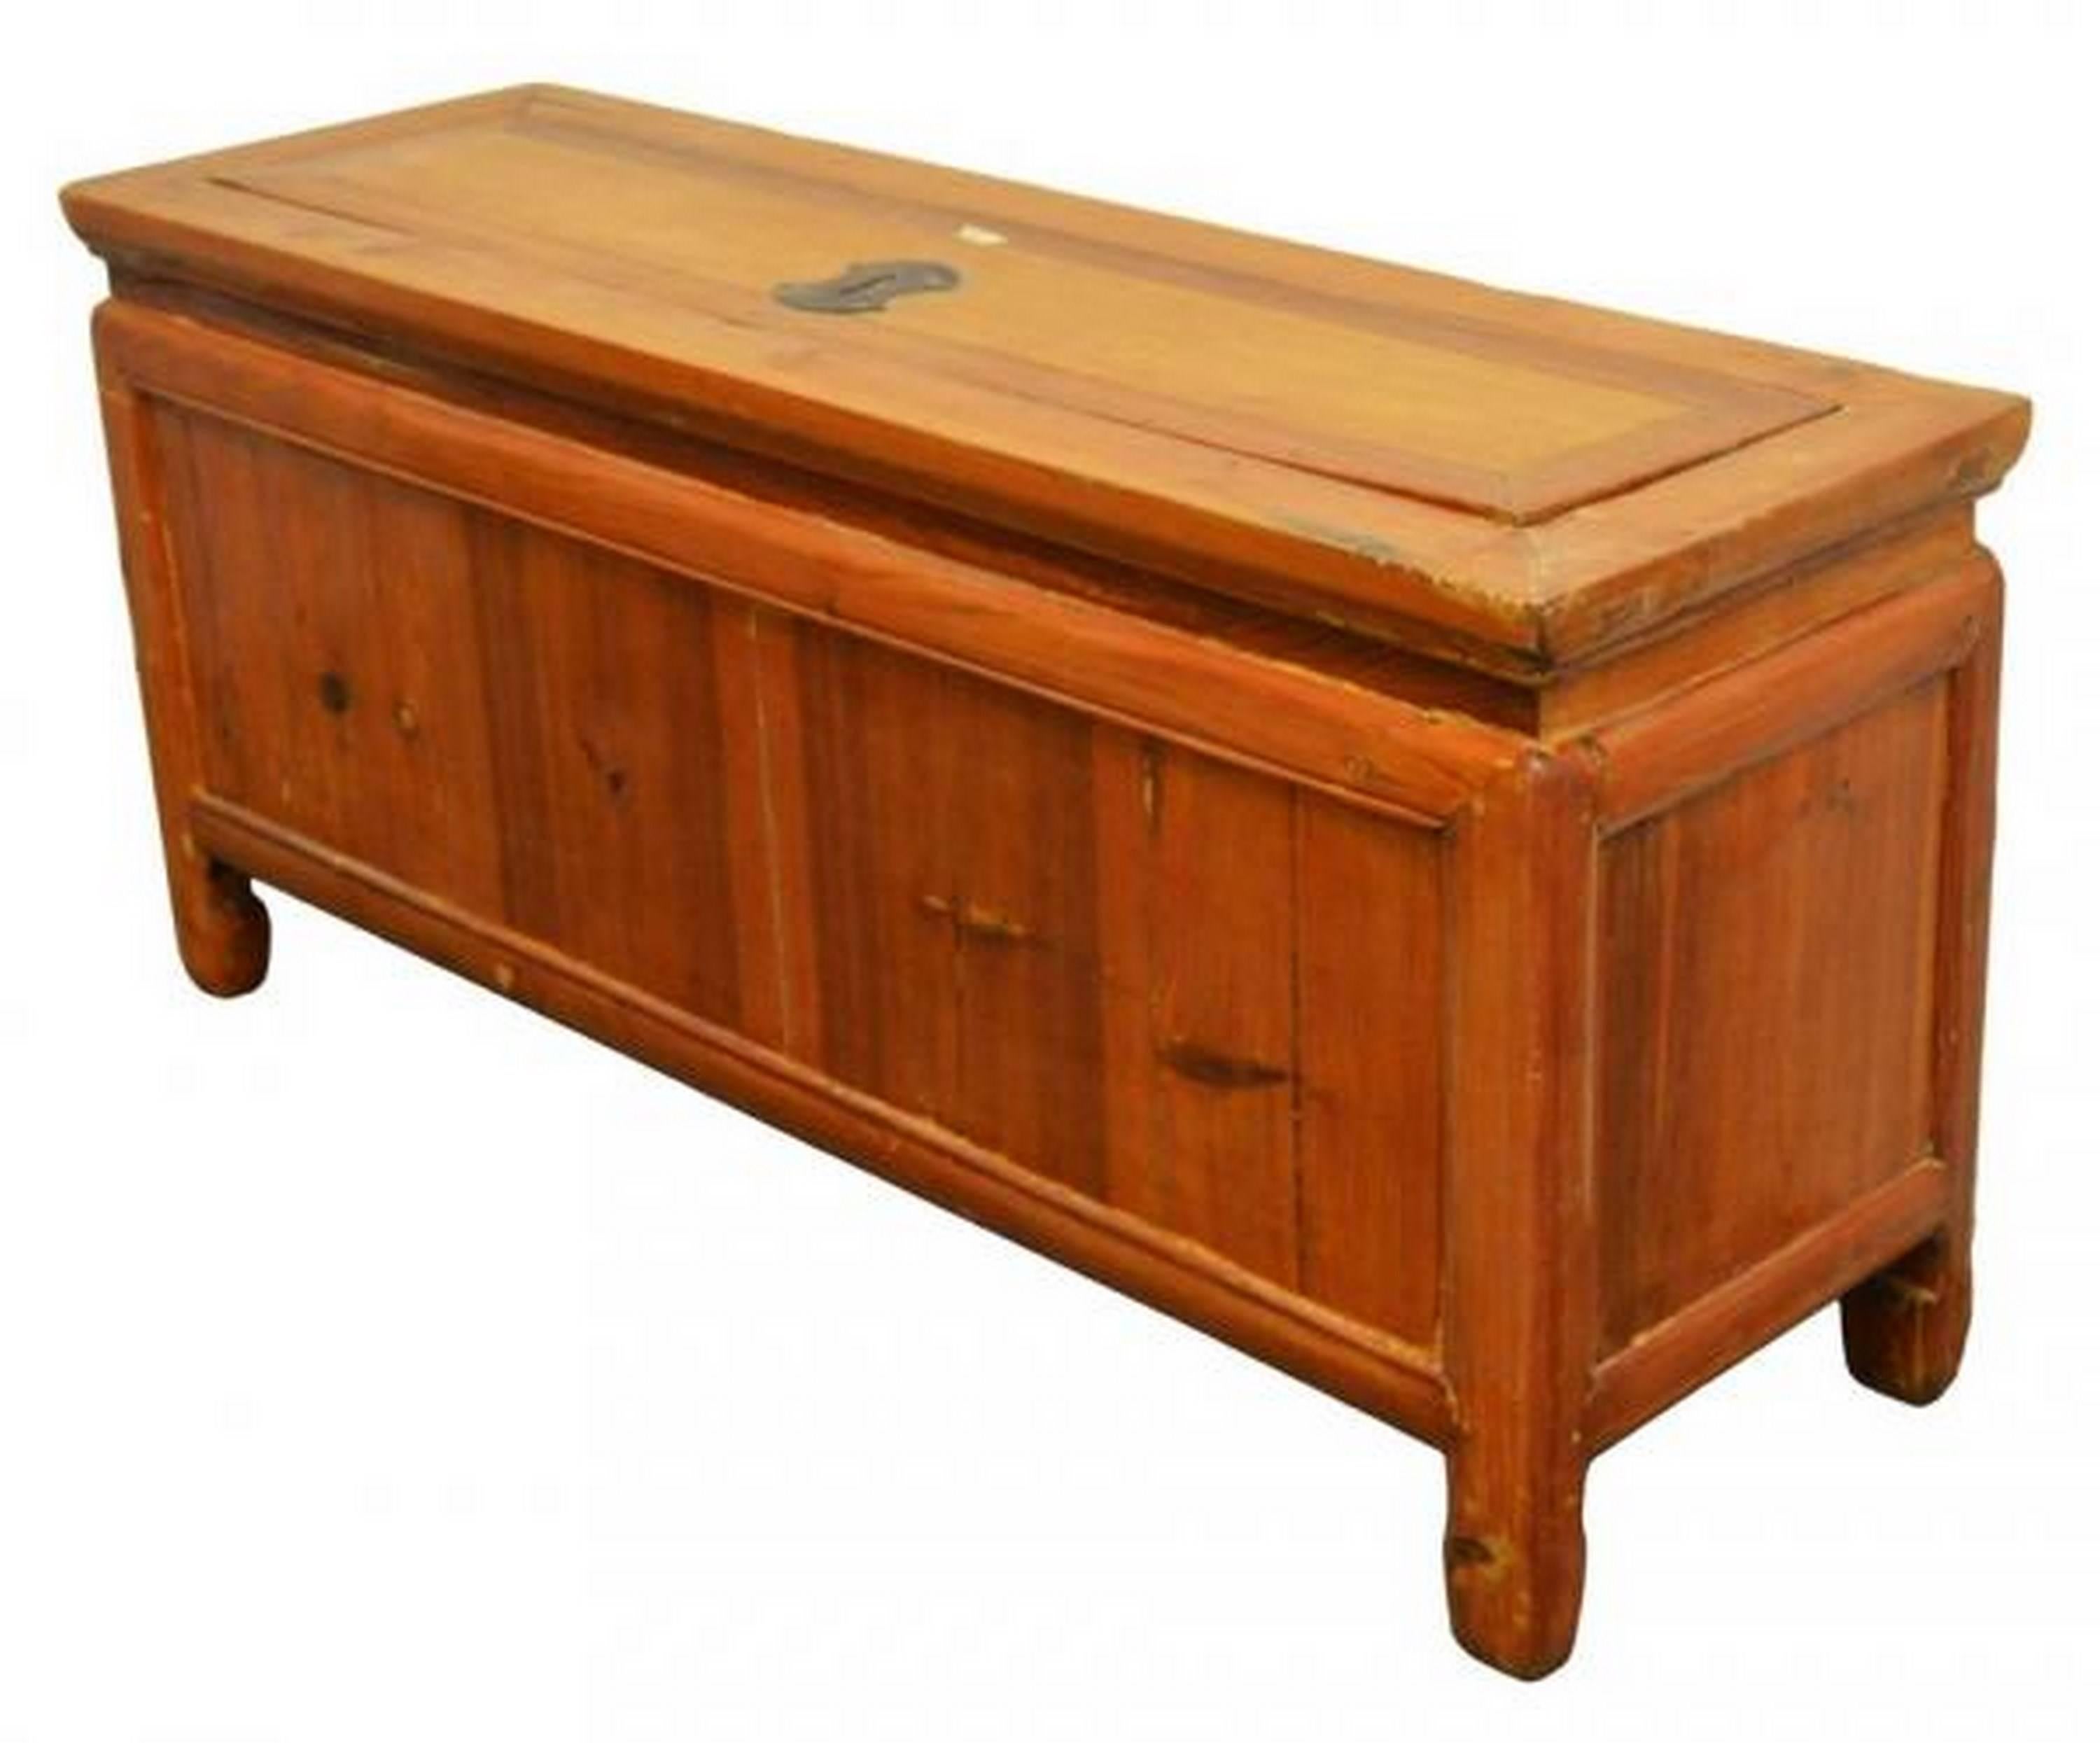 Antique Low Kang Chest with a Natural Patina from 19th Century China In Good Condition For Sale In Yonkers, NY